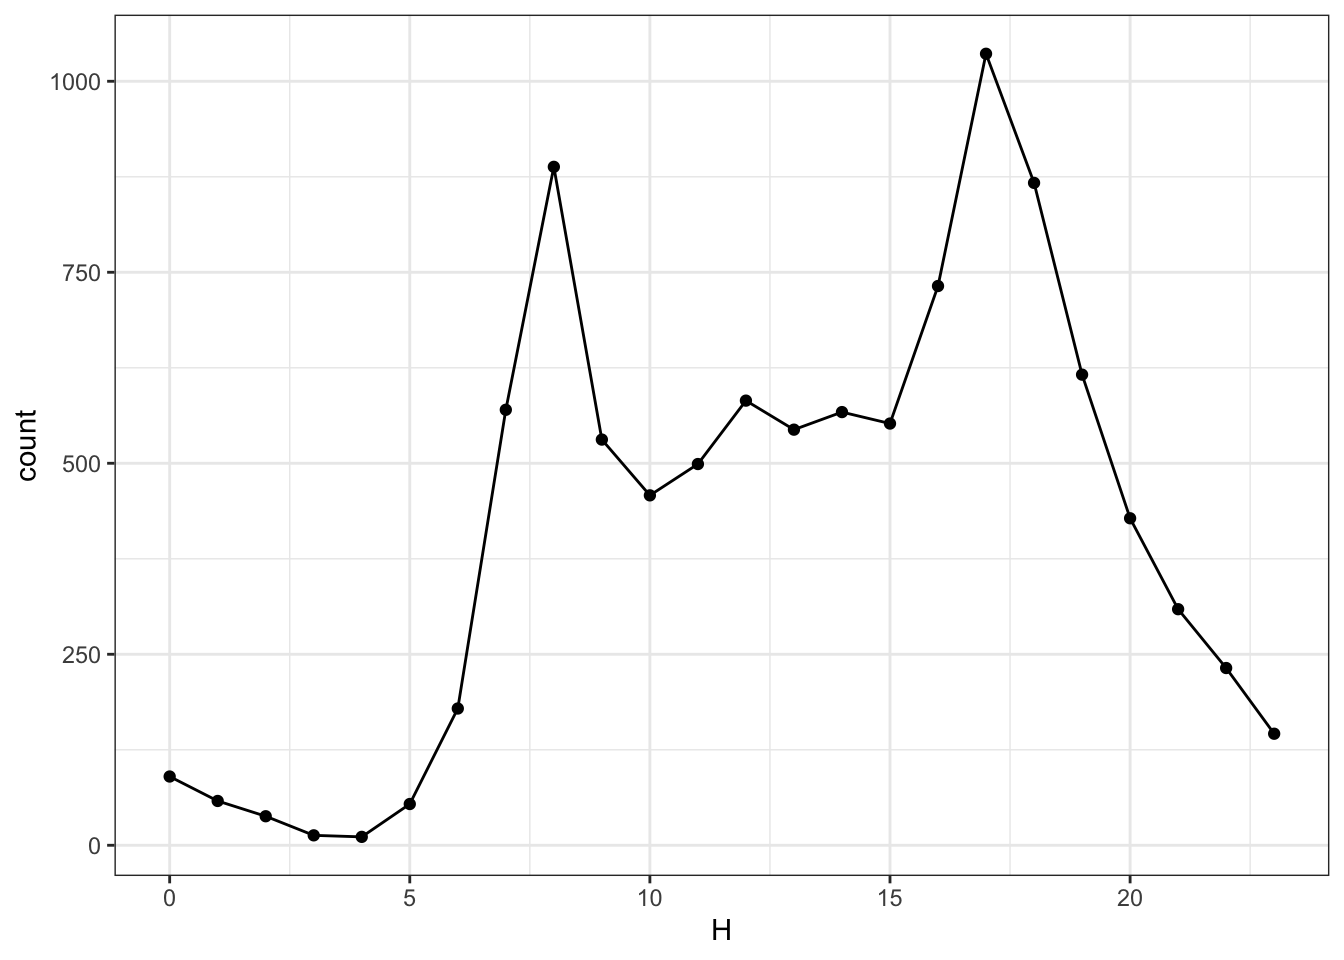 The number of events in each hour of the day. Compare to the scale in Figure 18.3. Why are the scales different?